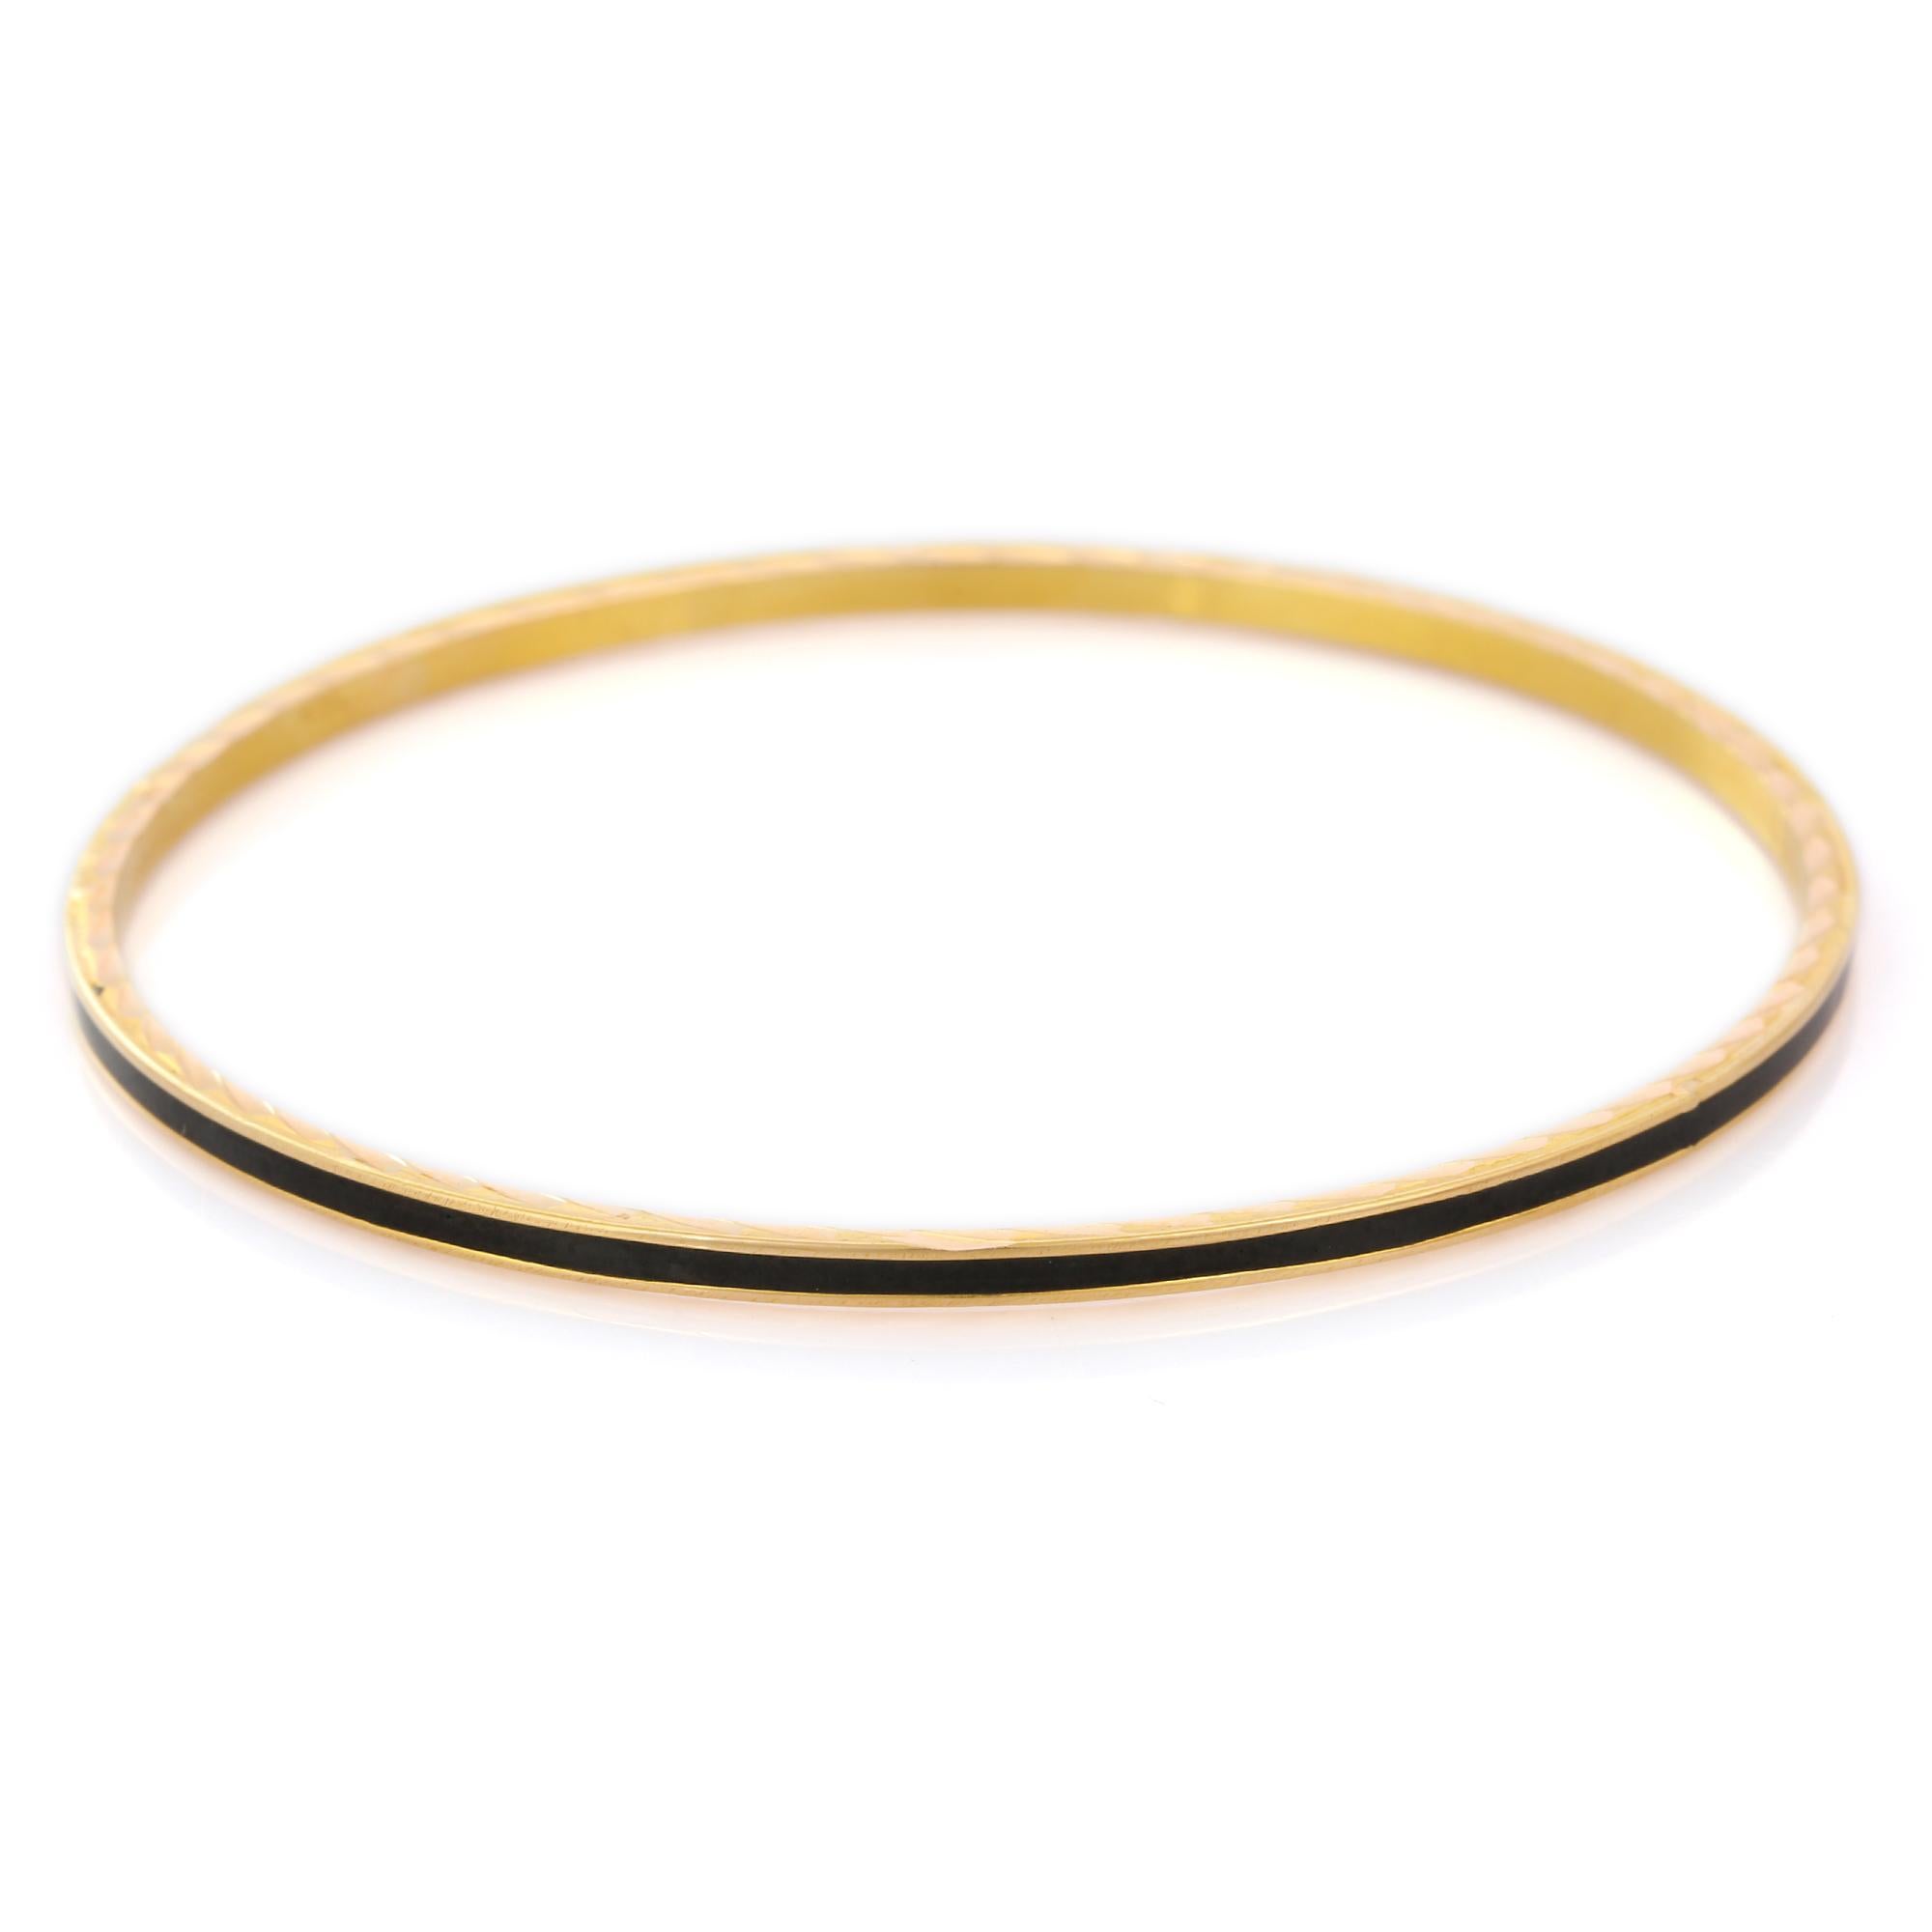 Black Enamel Bangle in 18K Gold. It’s a great jewelry ornament to wear on occasions and at the same time works as a wonderful gift for your loved ones. These lovely statement pieces are perfect generation jewelry to pass on.
Bangles feel comfortable